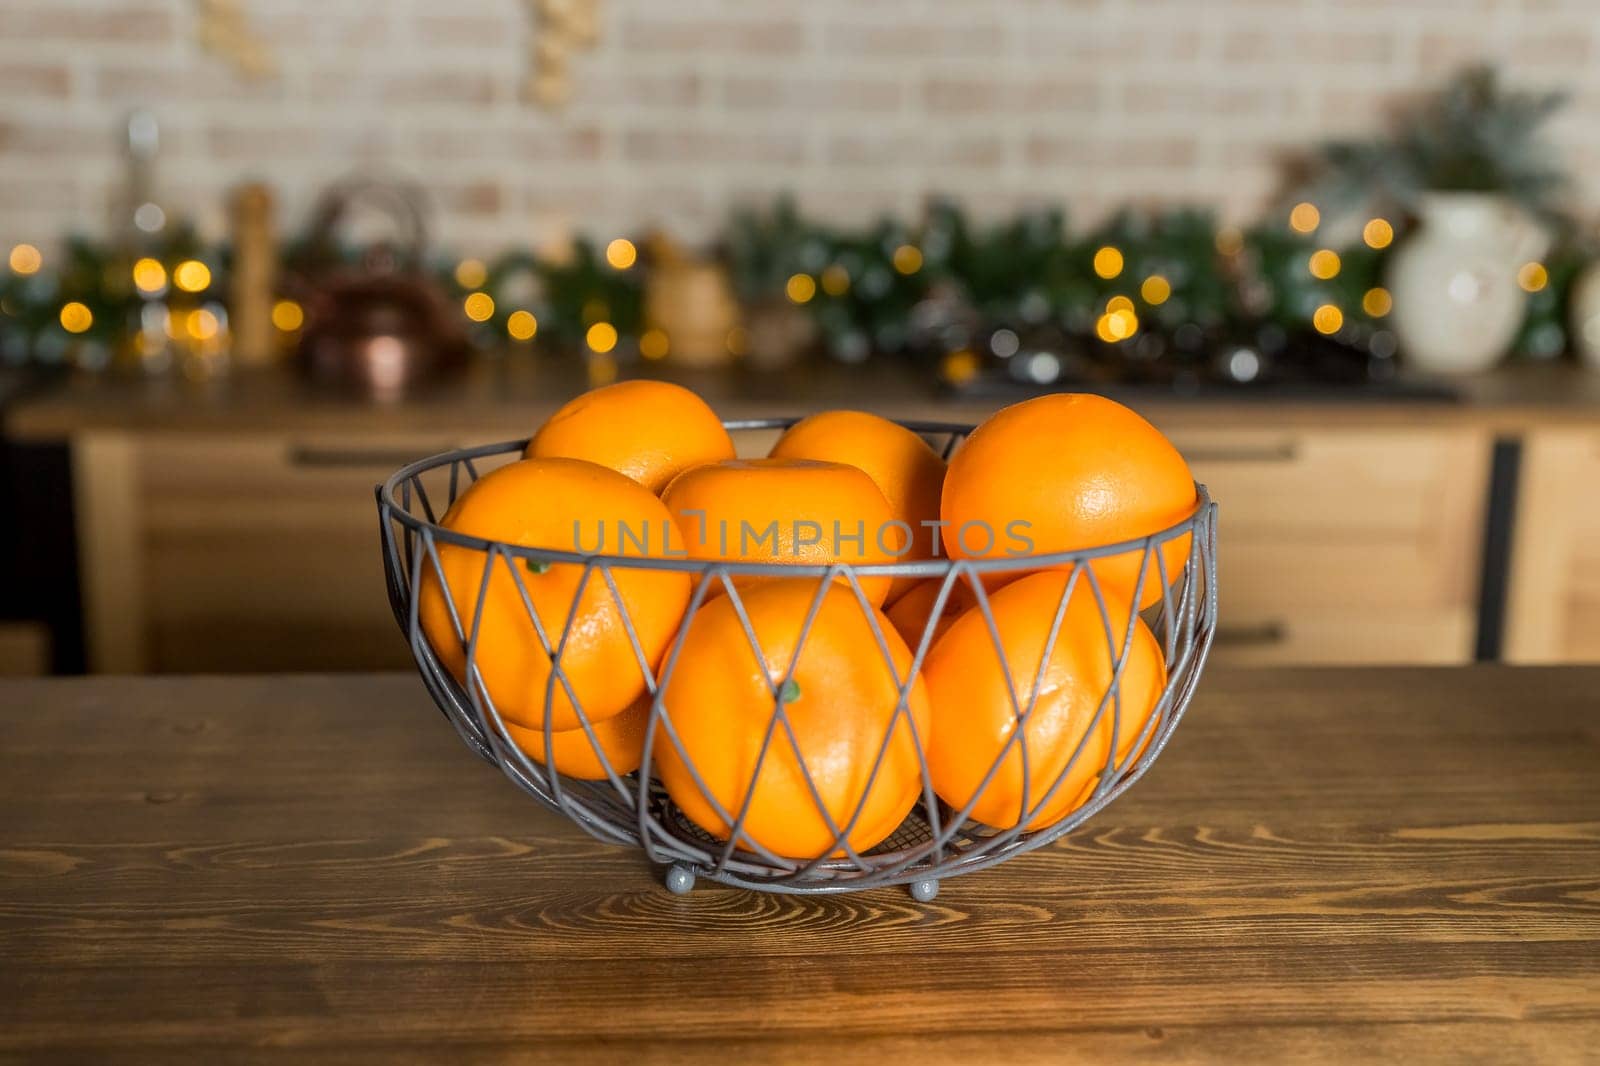 Fresh tangerines in wooden bowl on table against stylish decorated christmas tree with golden lights in scandinavian room.